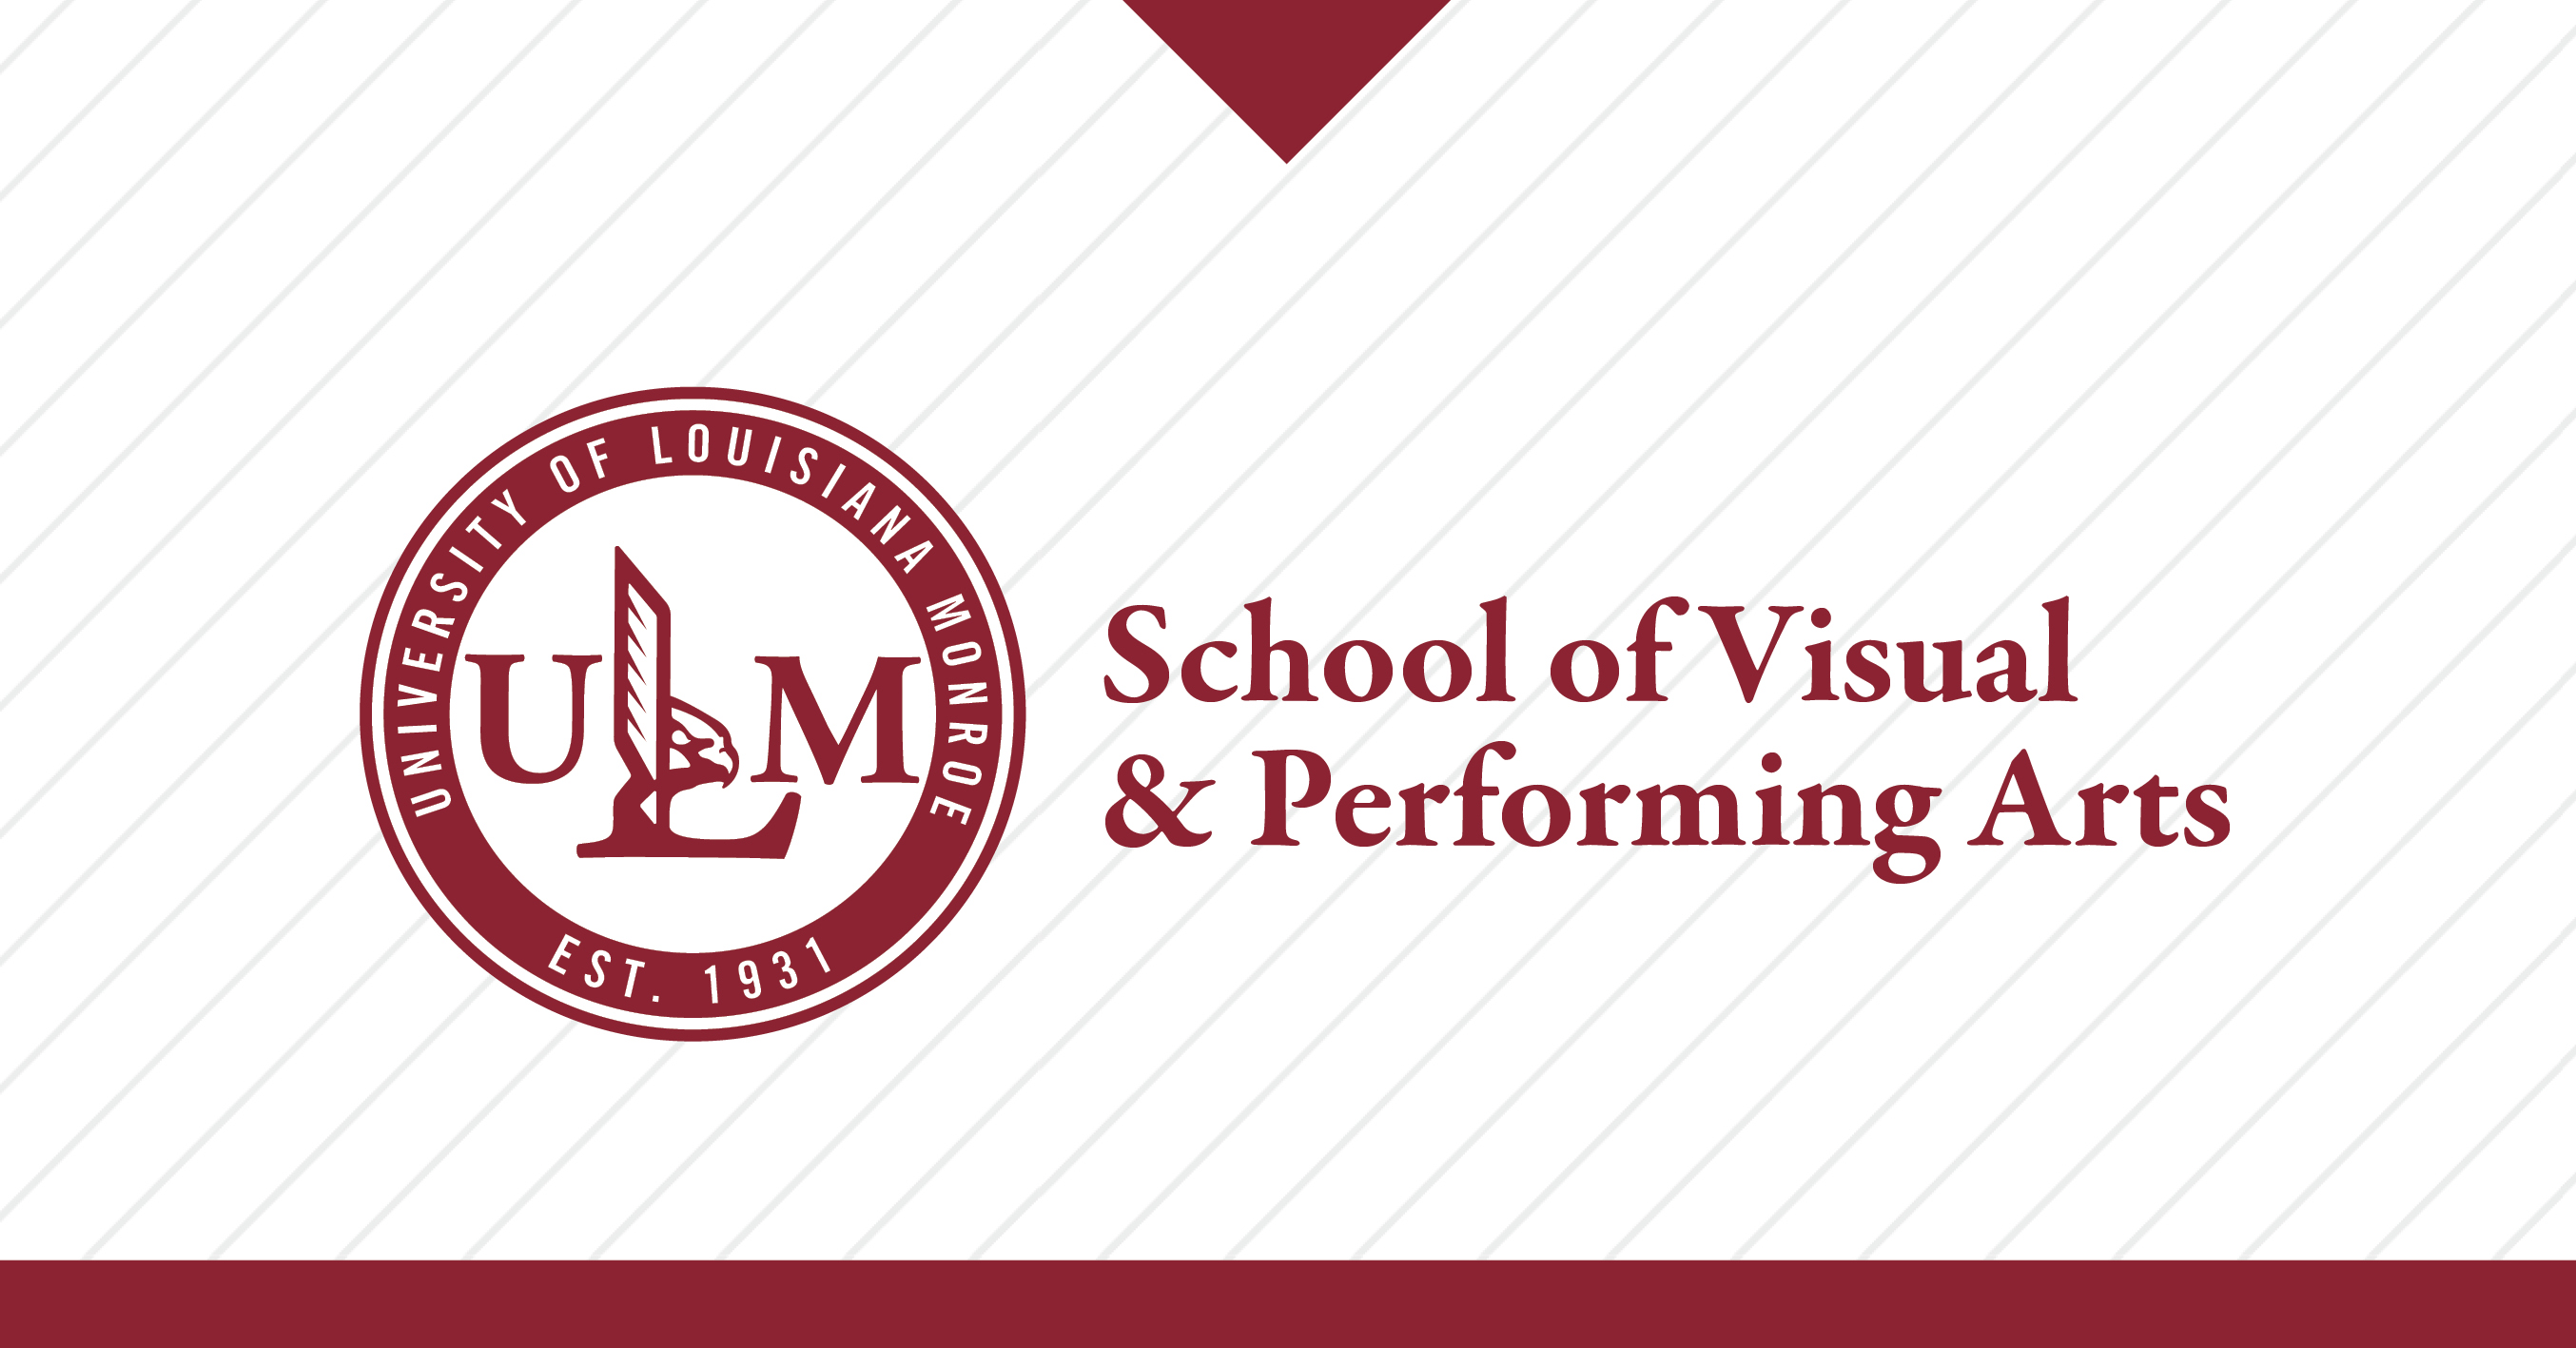 ULM School of Visual and Performing Arts logo on a white background